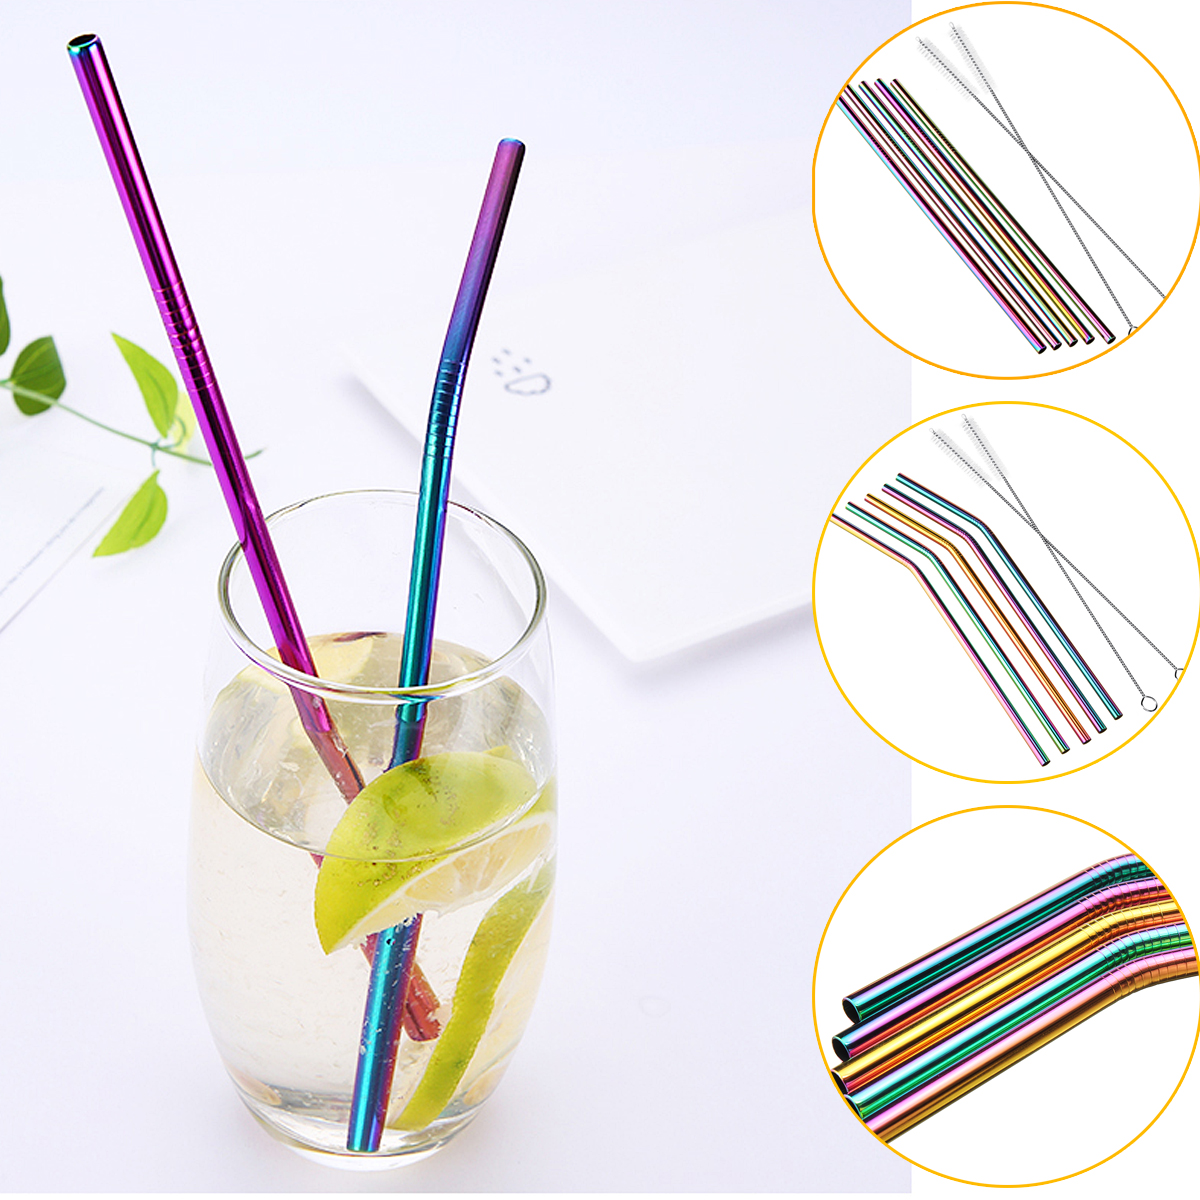 7PCS-Premium-Stainless-Steel-Metal-Drinking-Straw-Reusable-Straws-Set-With-Cleaner-Brushes-1347731-1